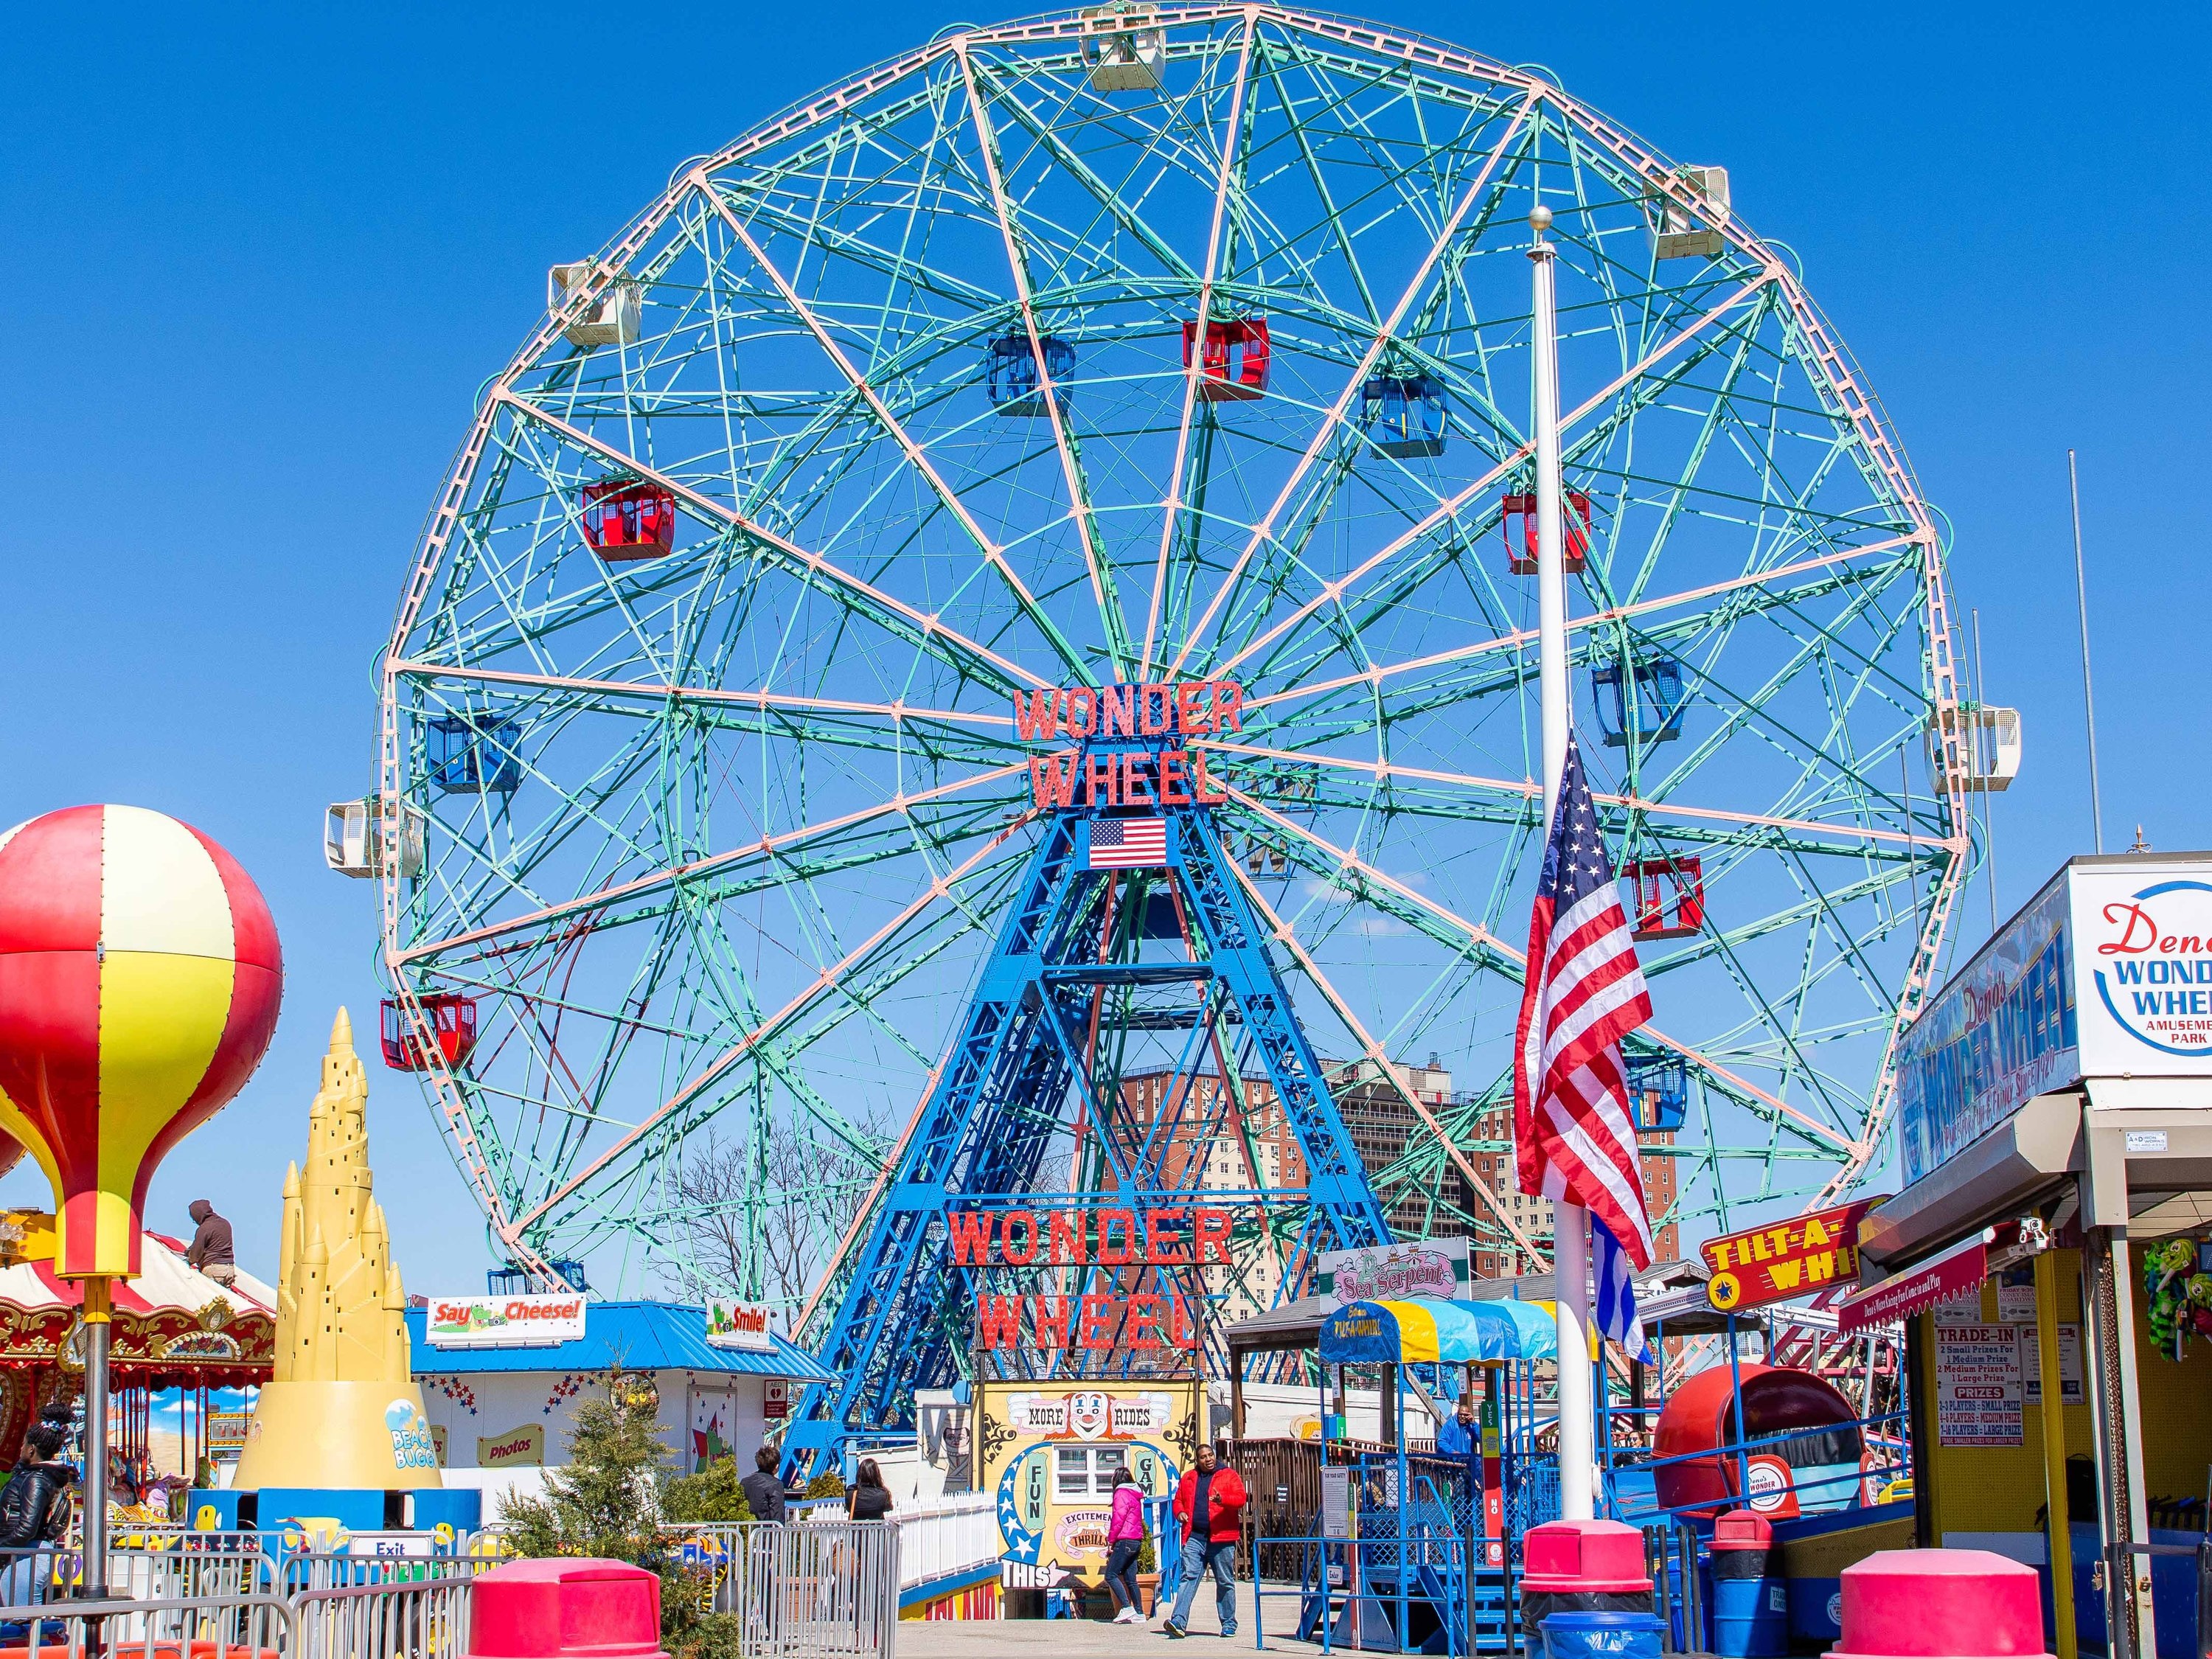 Deno's Wonder Wheel in Coney Island is getting a new roller coaster in 2021